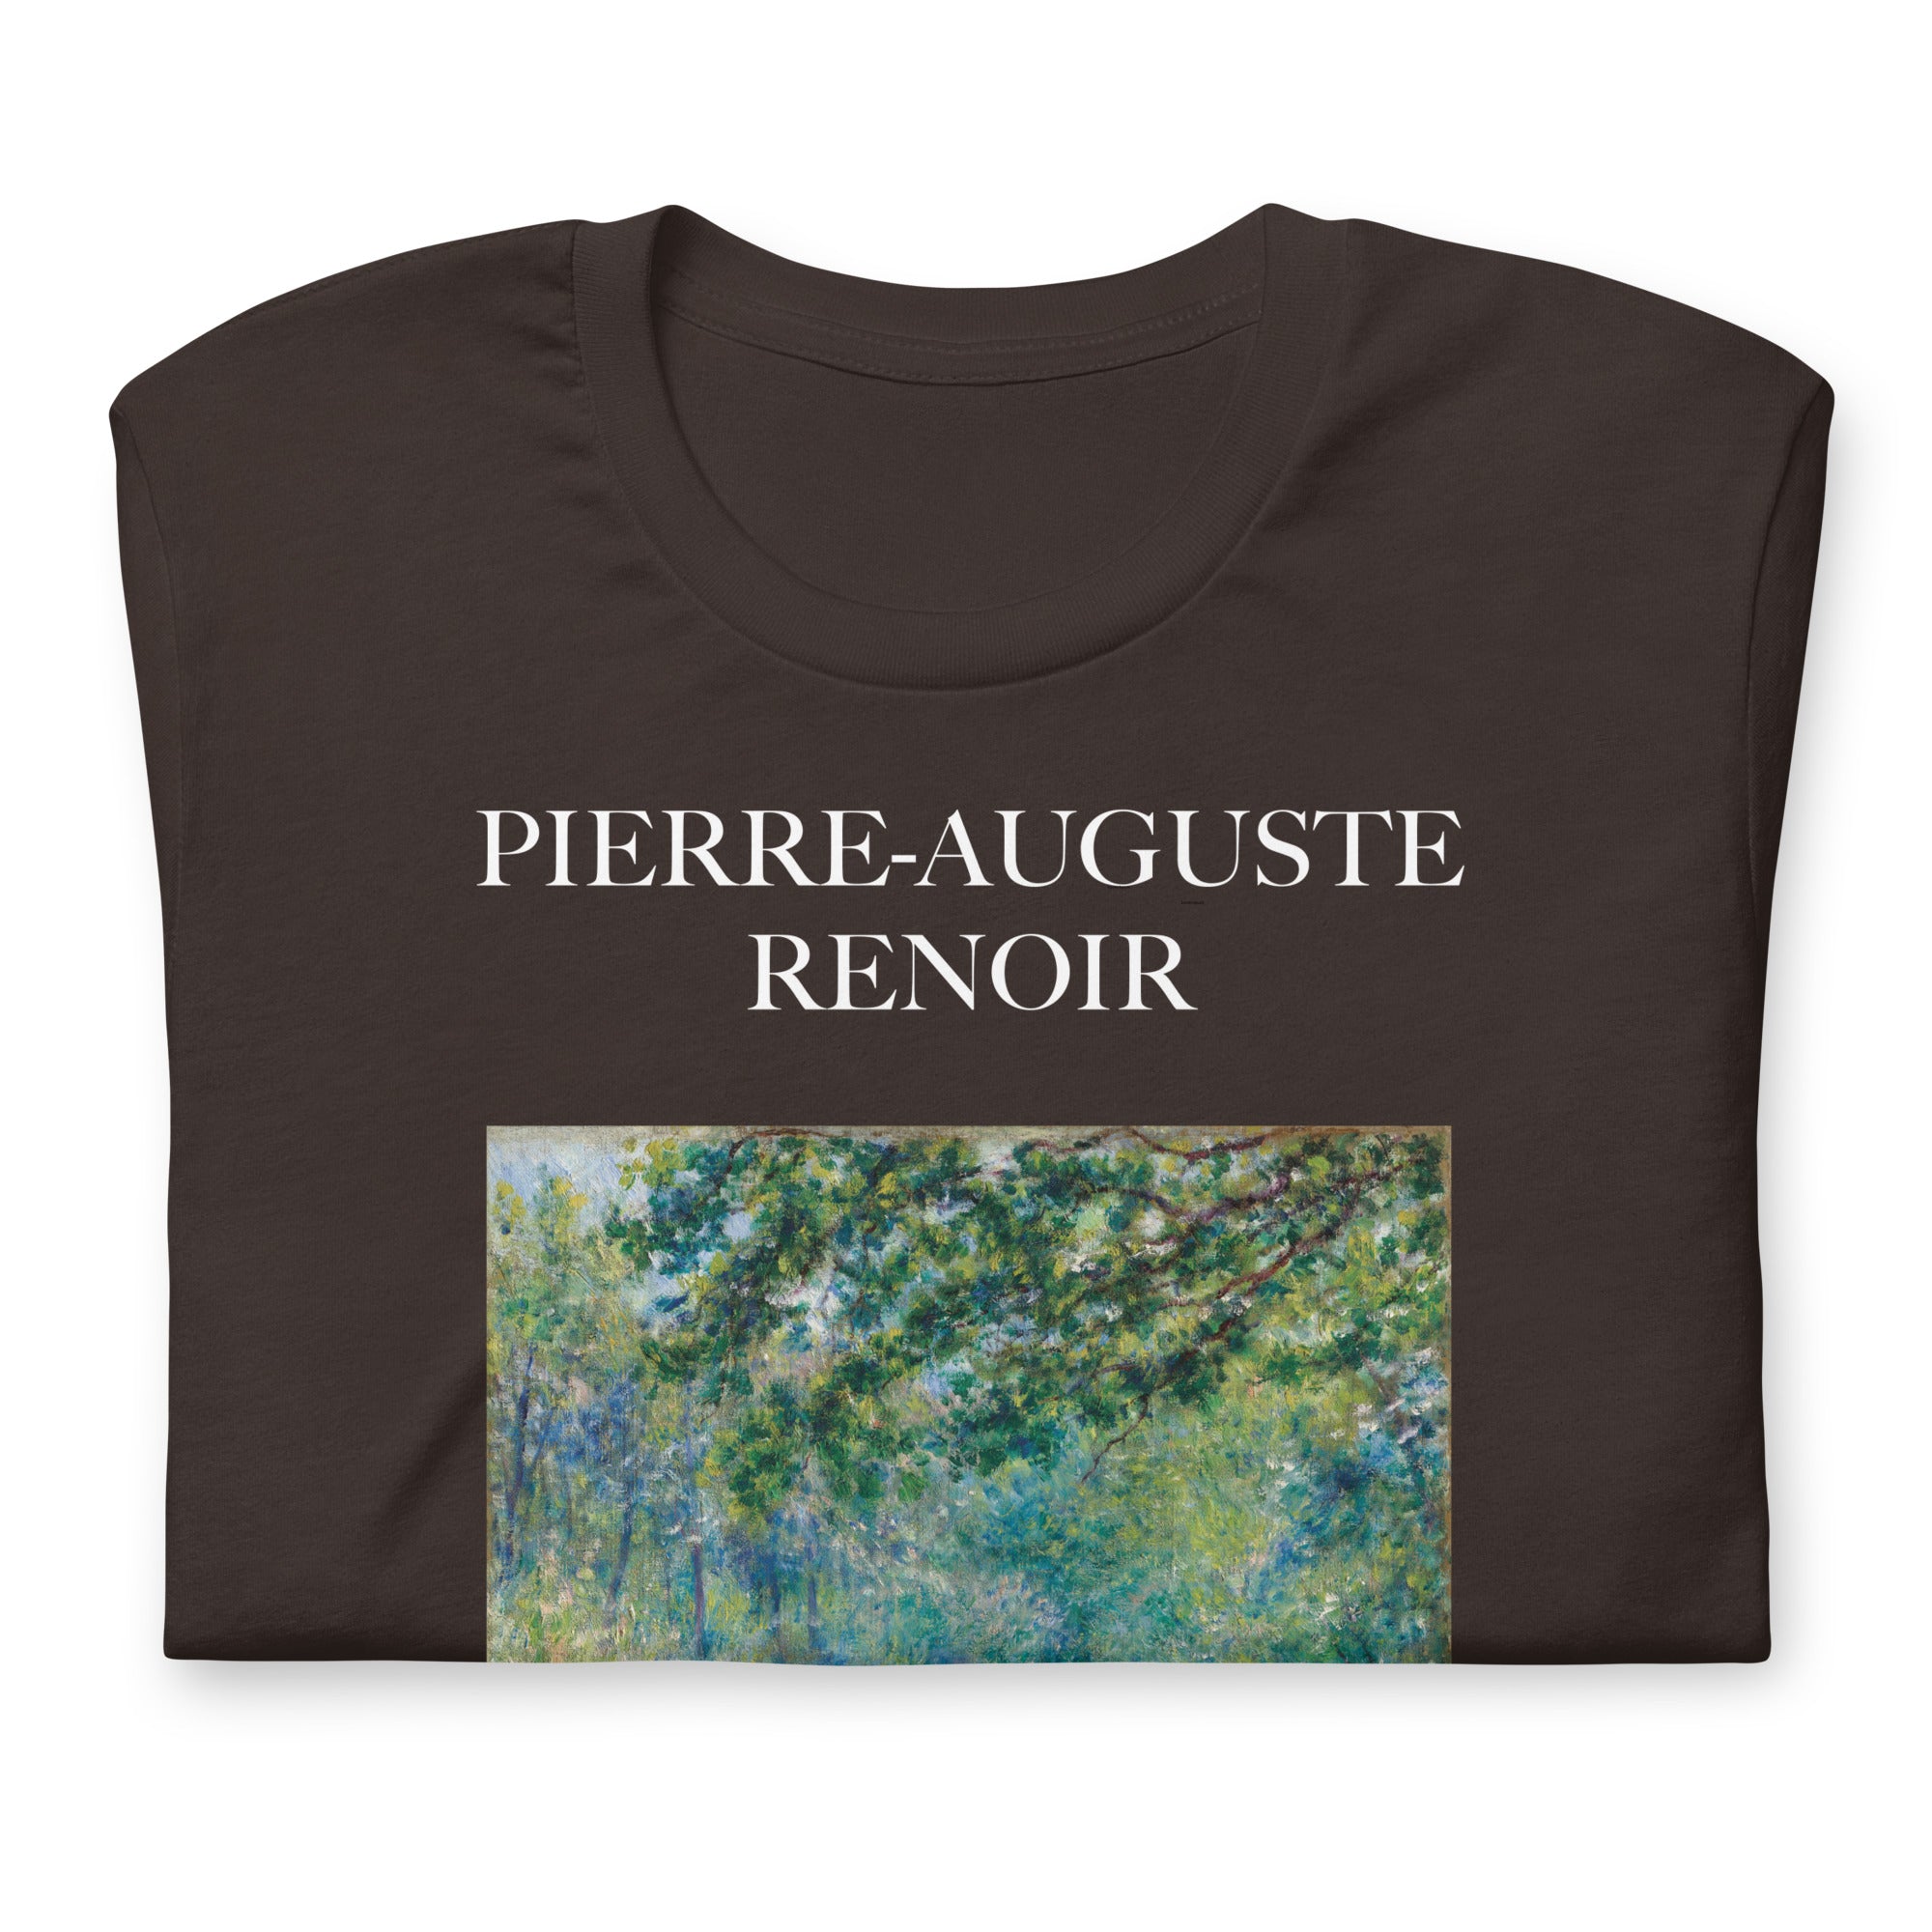 Pierre-Auguste Renoir 'Path in the Forest' Famous Painting T-Shirt | Unisex Classic Art Tee